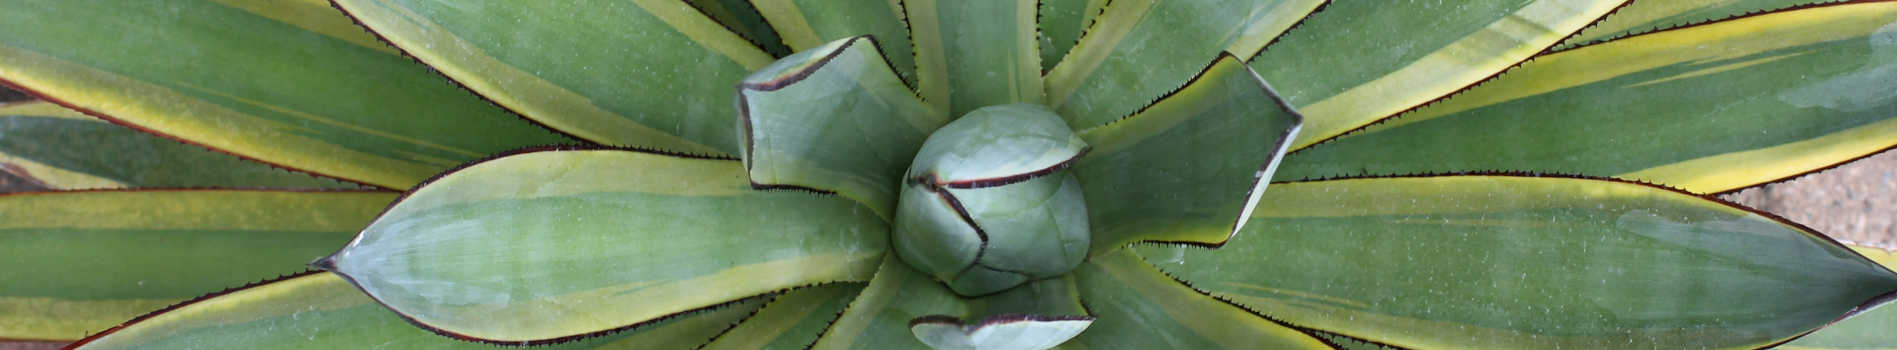 Agave | Agave Plants for Sale | Variegated Agave for Sale